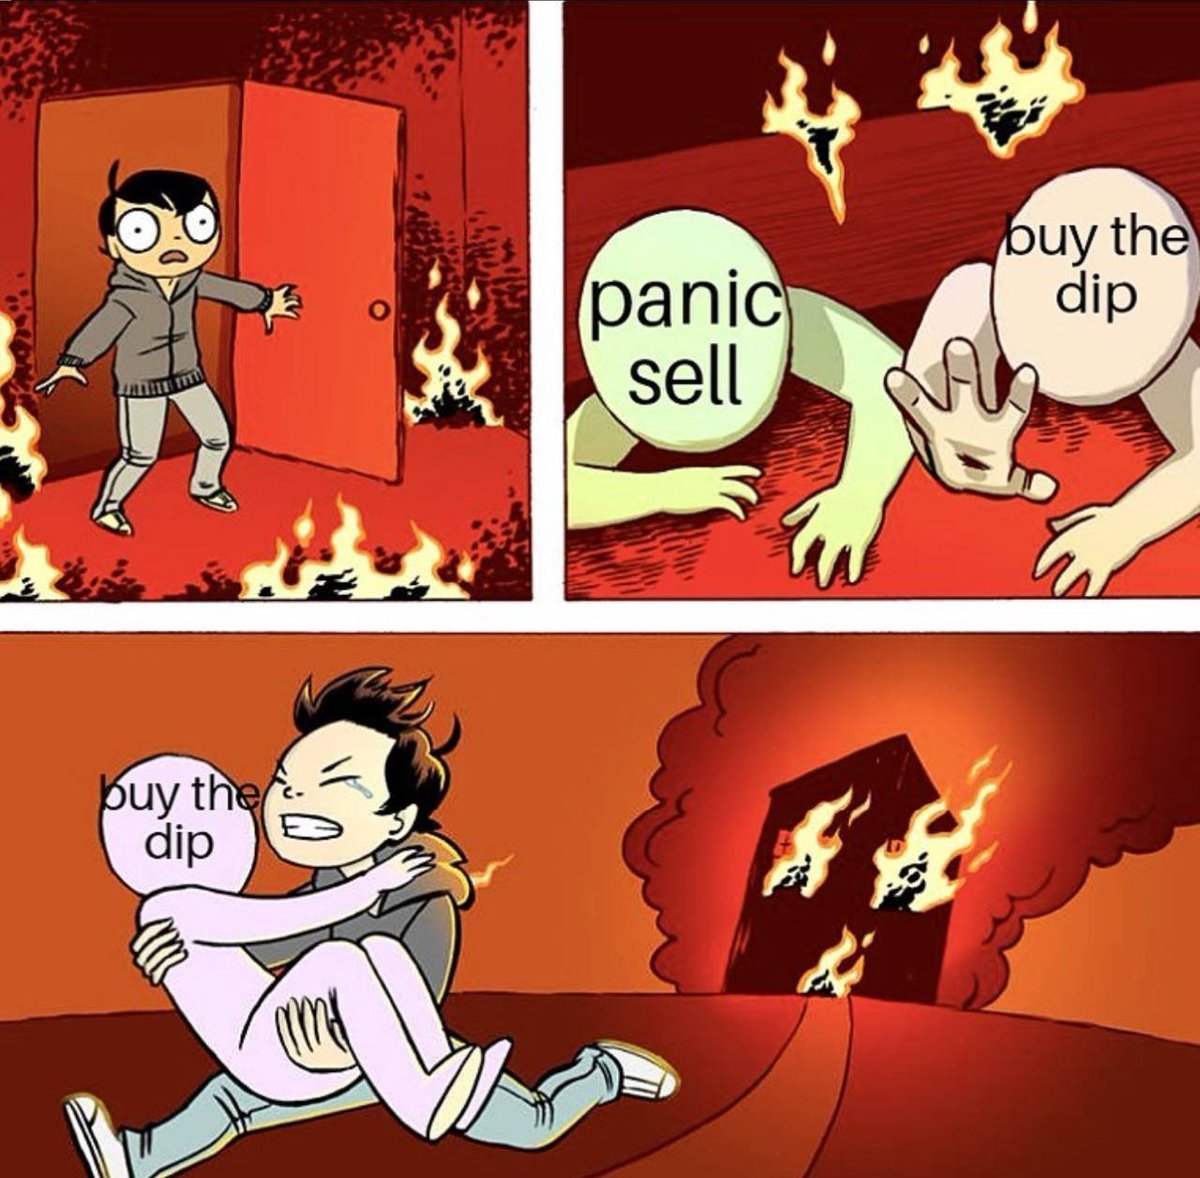 Always buy the dip on red days 🩸